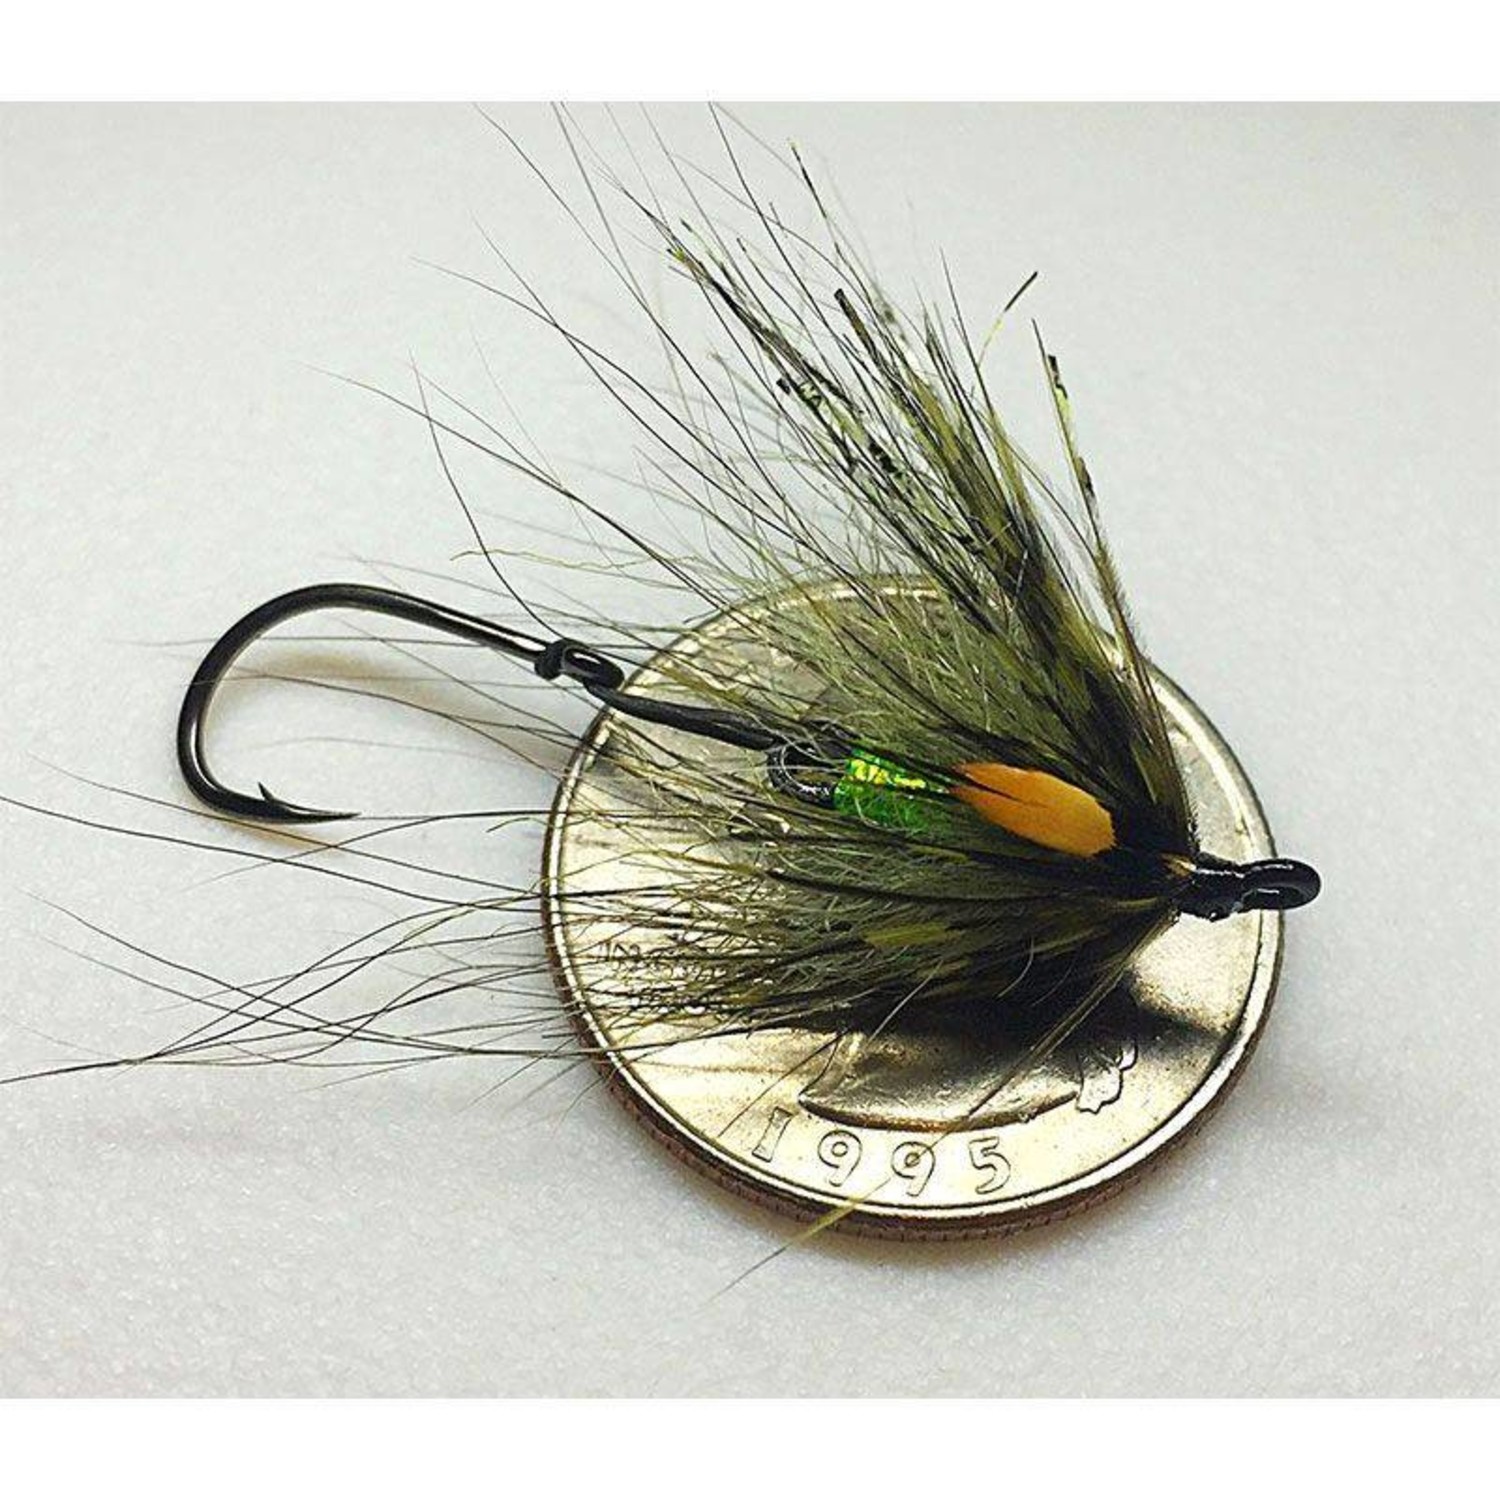 Micro Fly Fishing Reel!!! World's Smallest 